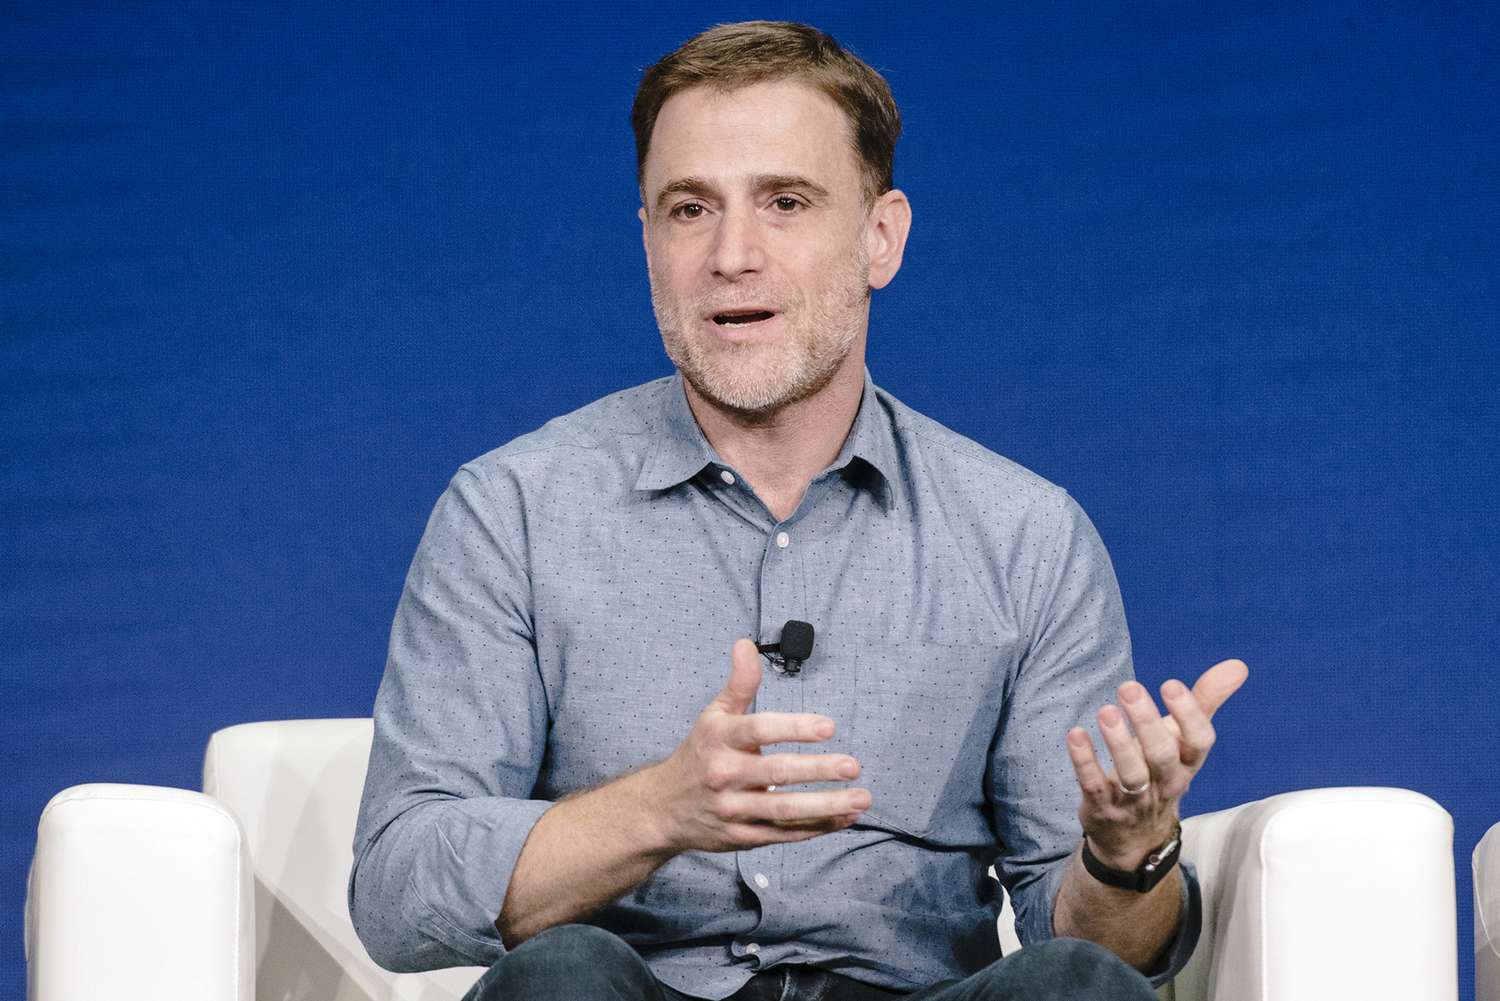 Stewart Butterfield, chief executive officer of Slack Technologies Inc., speaks during the BoxWorks 2019 Conference 